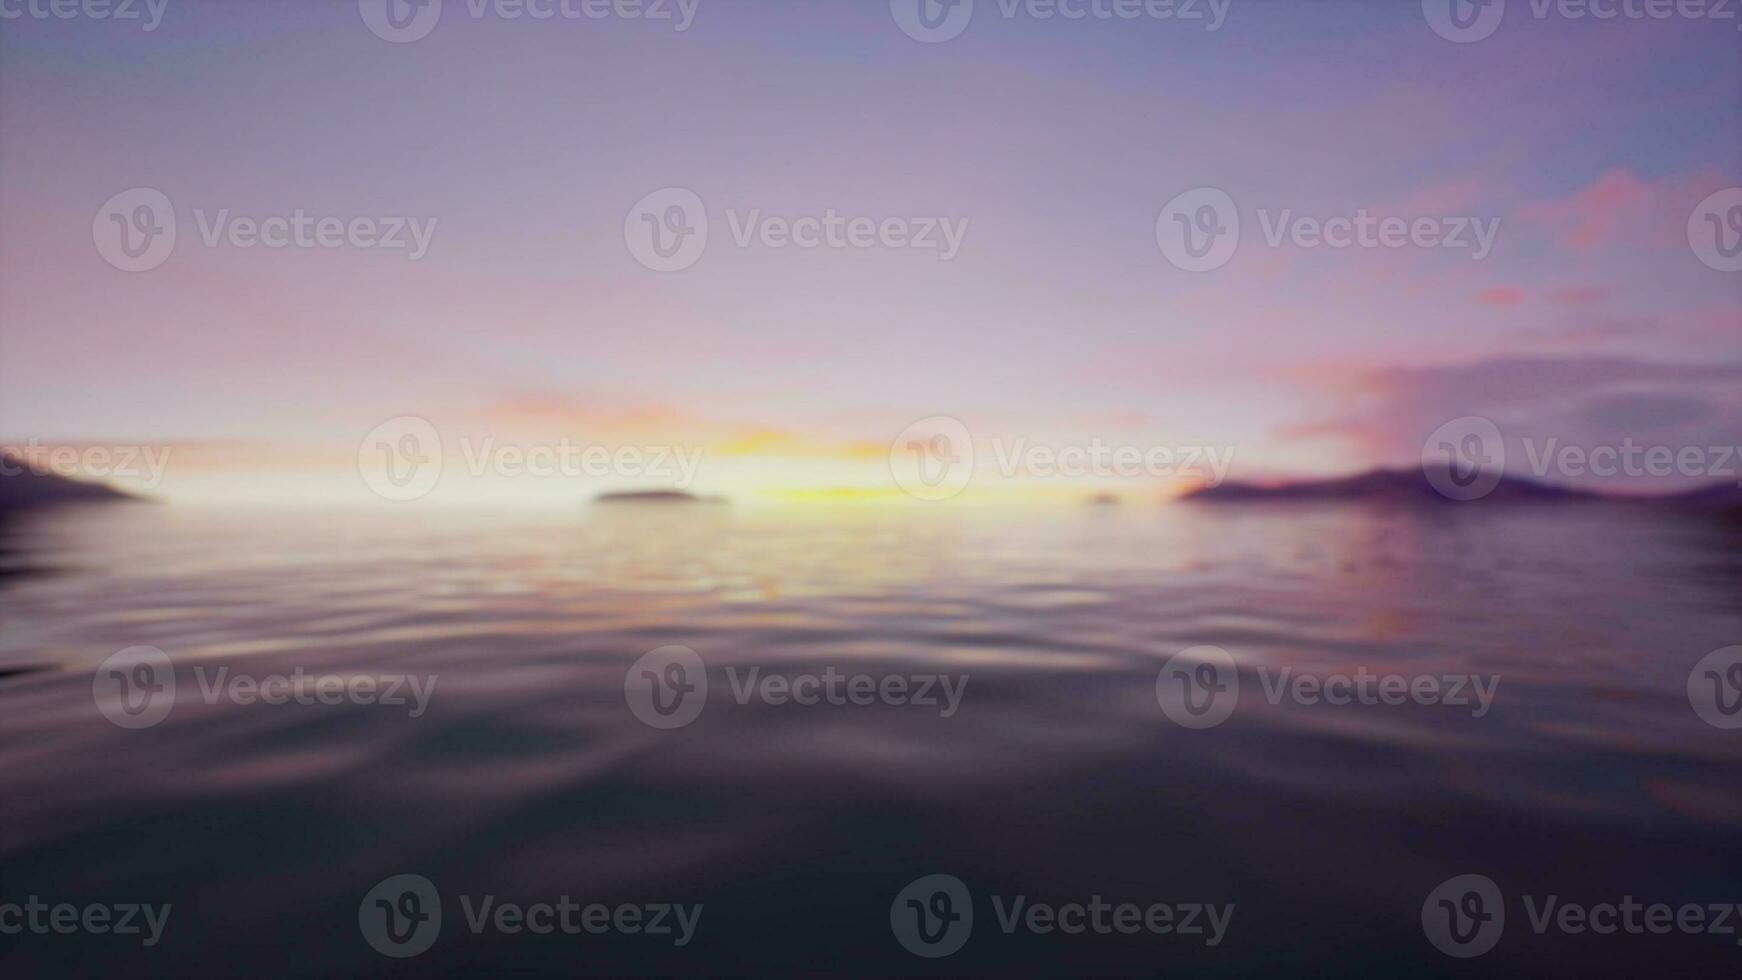 A serene and tranquil body of water captured in a dreamlike photo